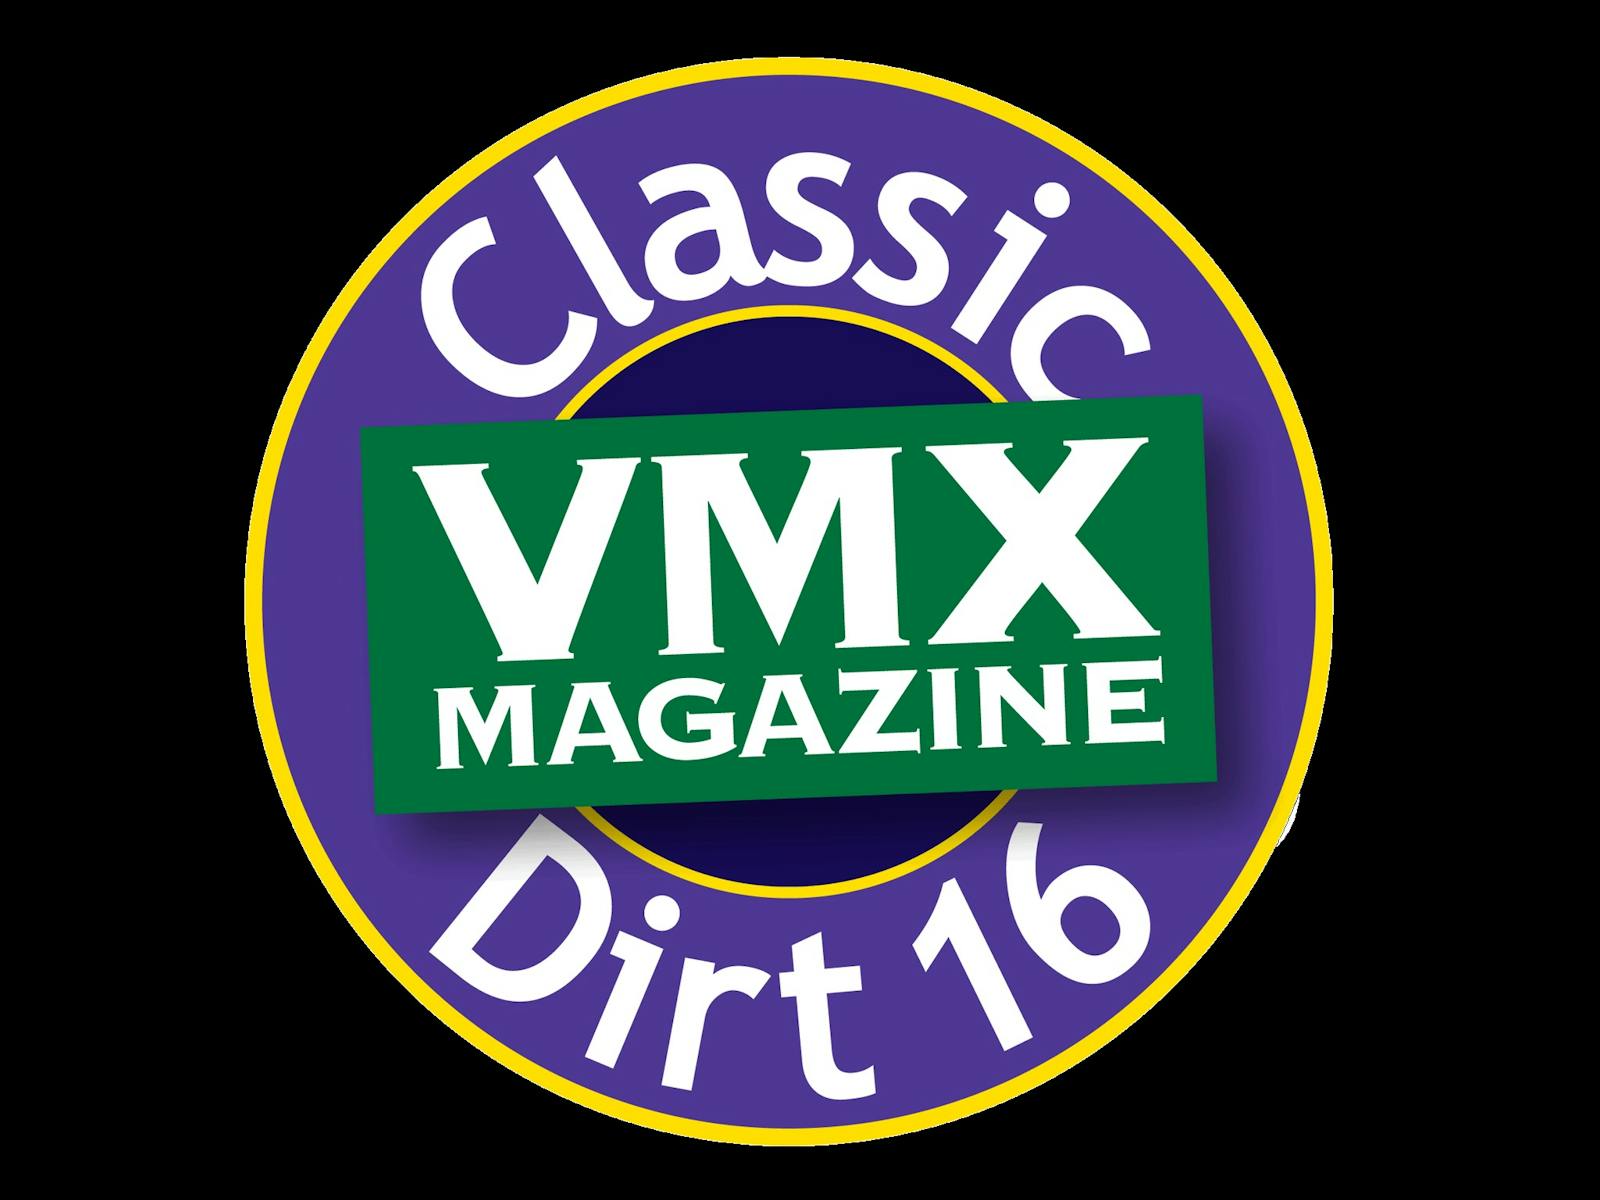 Image for VMX Magazine Classic Dirt 16 brought to you by Rat Racing